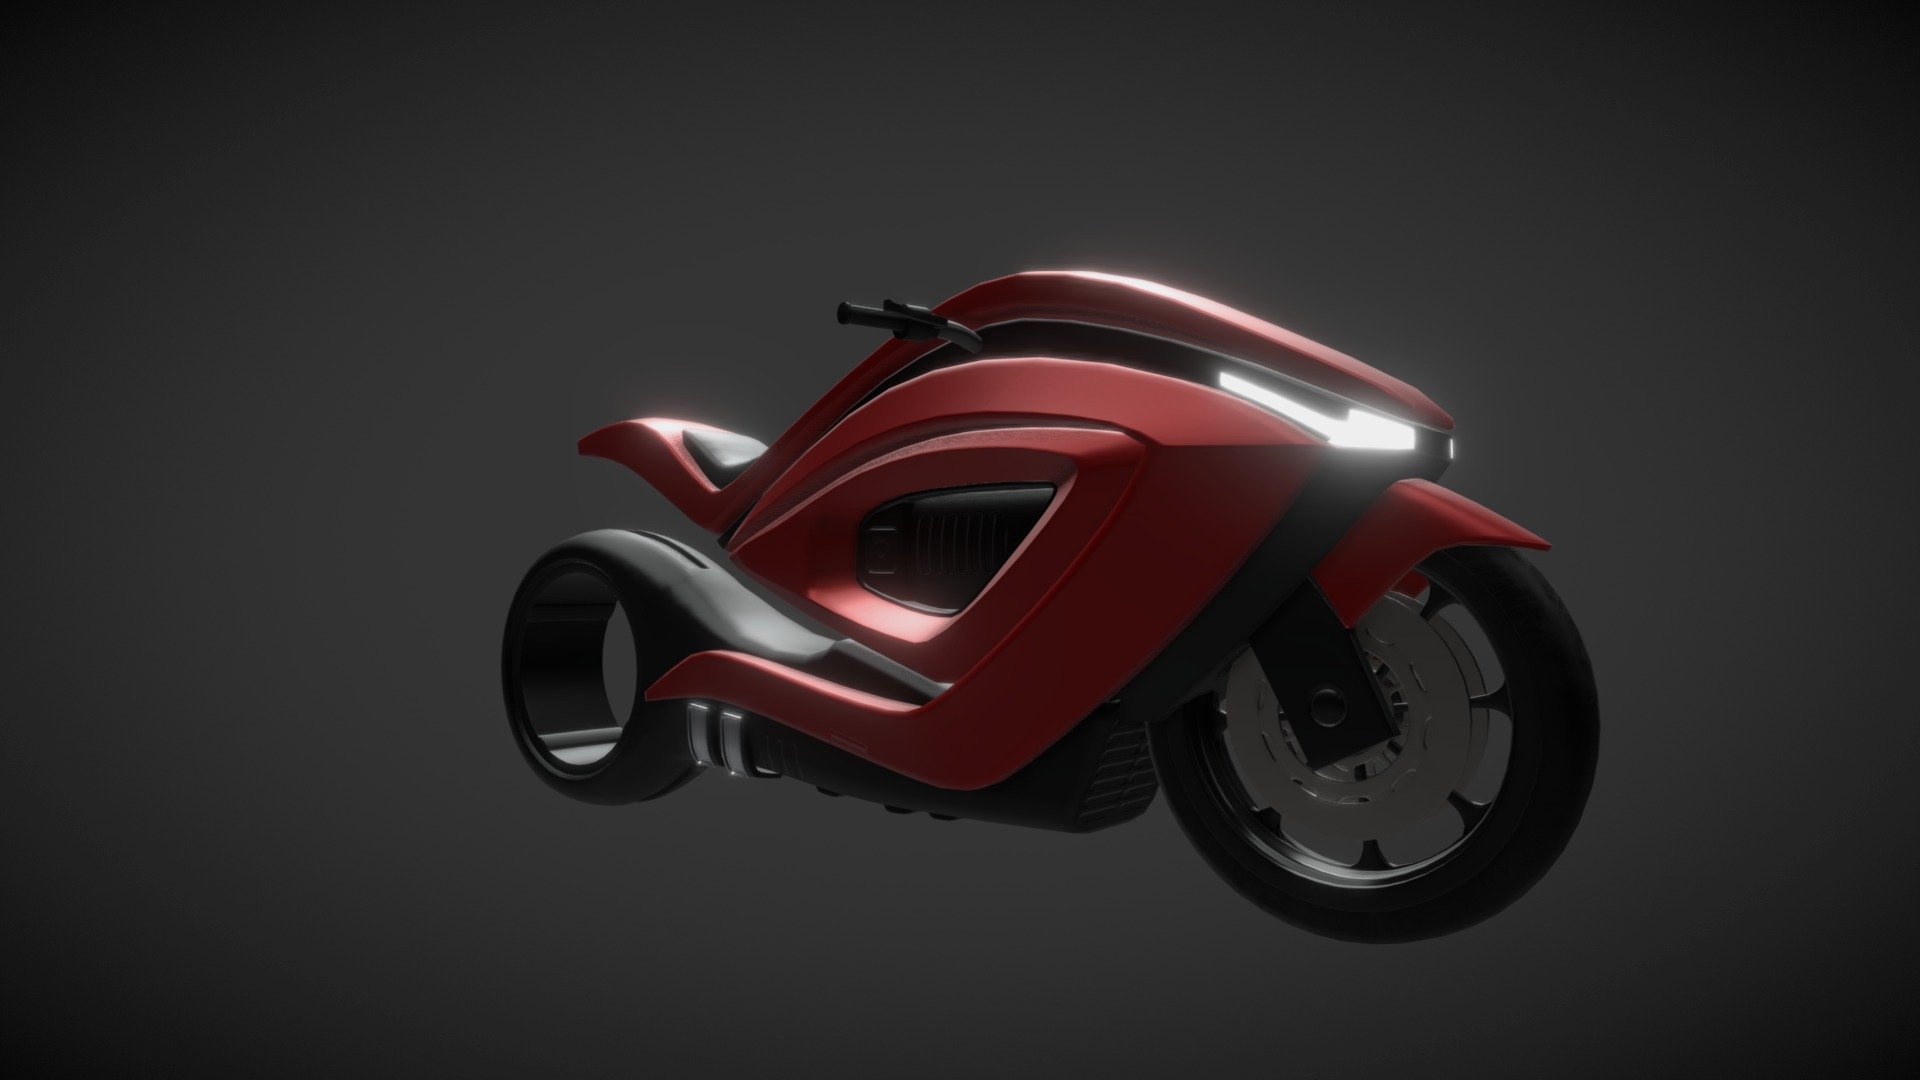 Based on concept drawing i found on the Internet - Ferrari Prototype Bike - 3D model by fahd 3d model